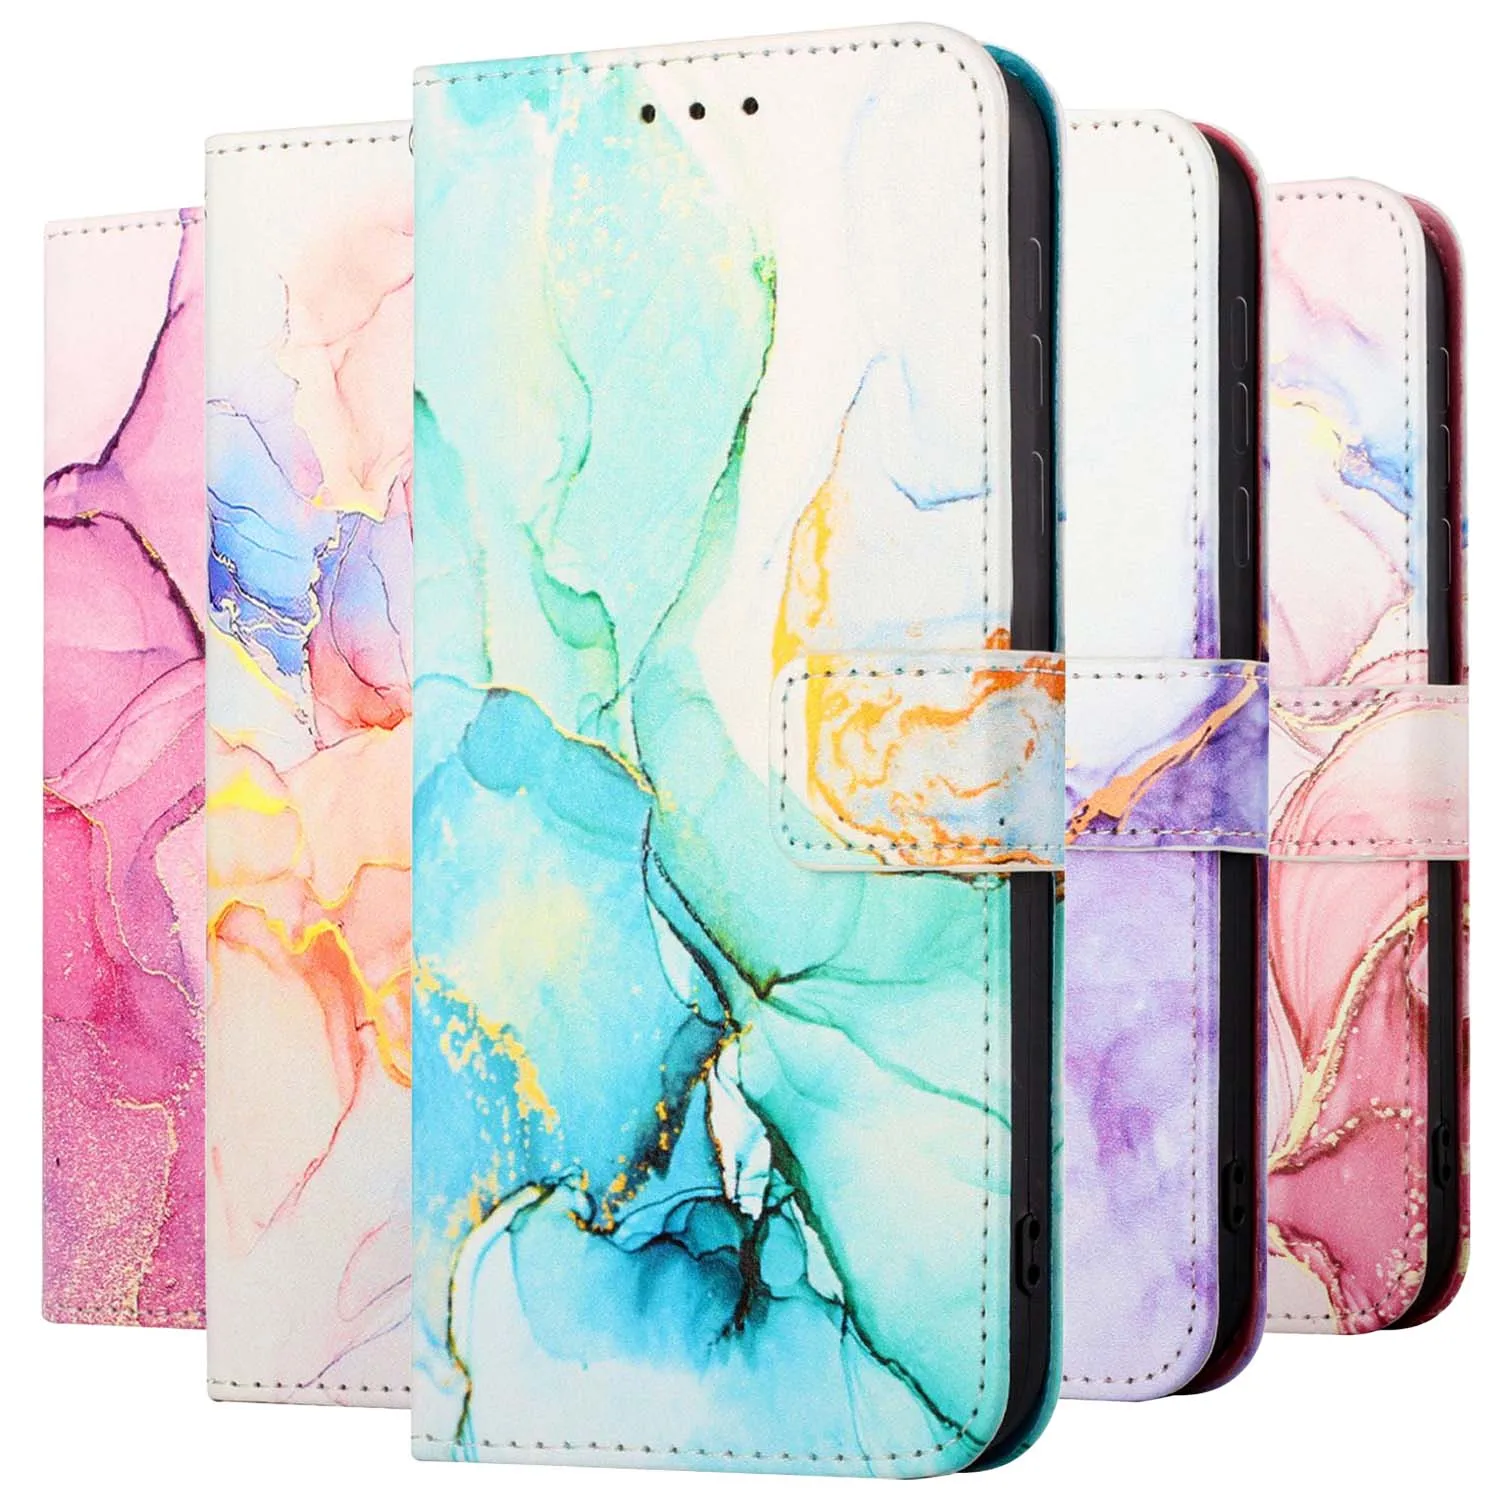 

Marble Flip Phone Case For Nokia G10 G20 G11 G21 G50 G300 C01 Plus C20 Plus C30 X10 X20 XR20 1.4 6.3 Leather Wallet Book Cover